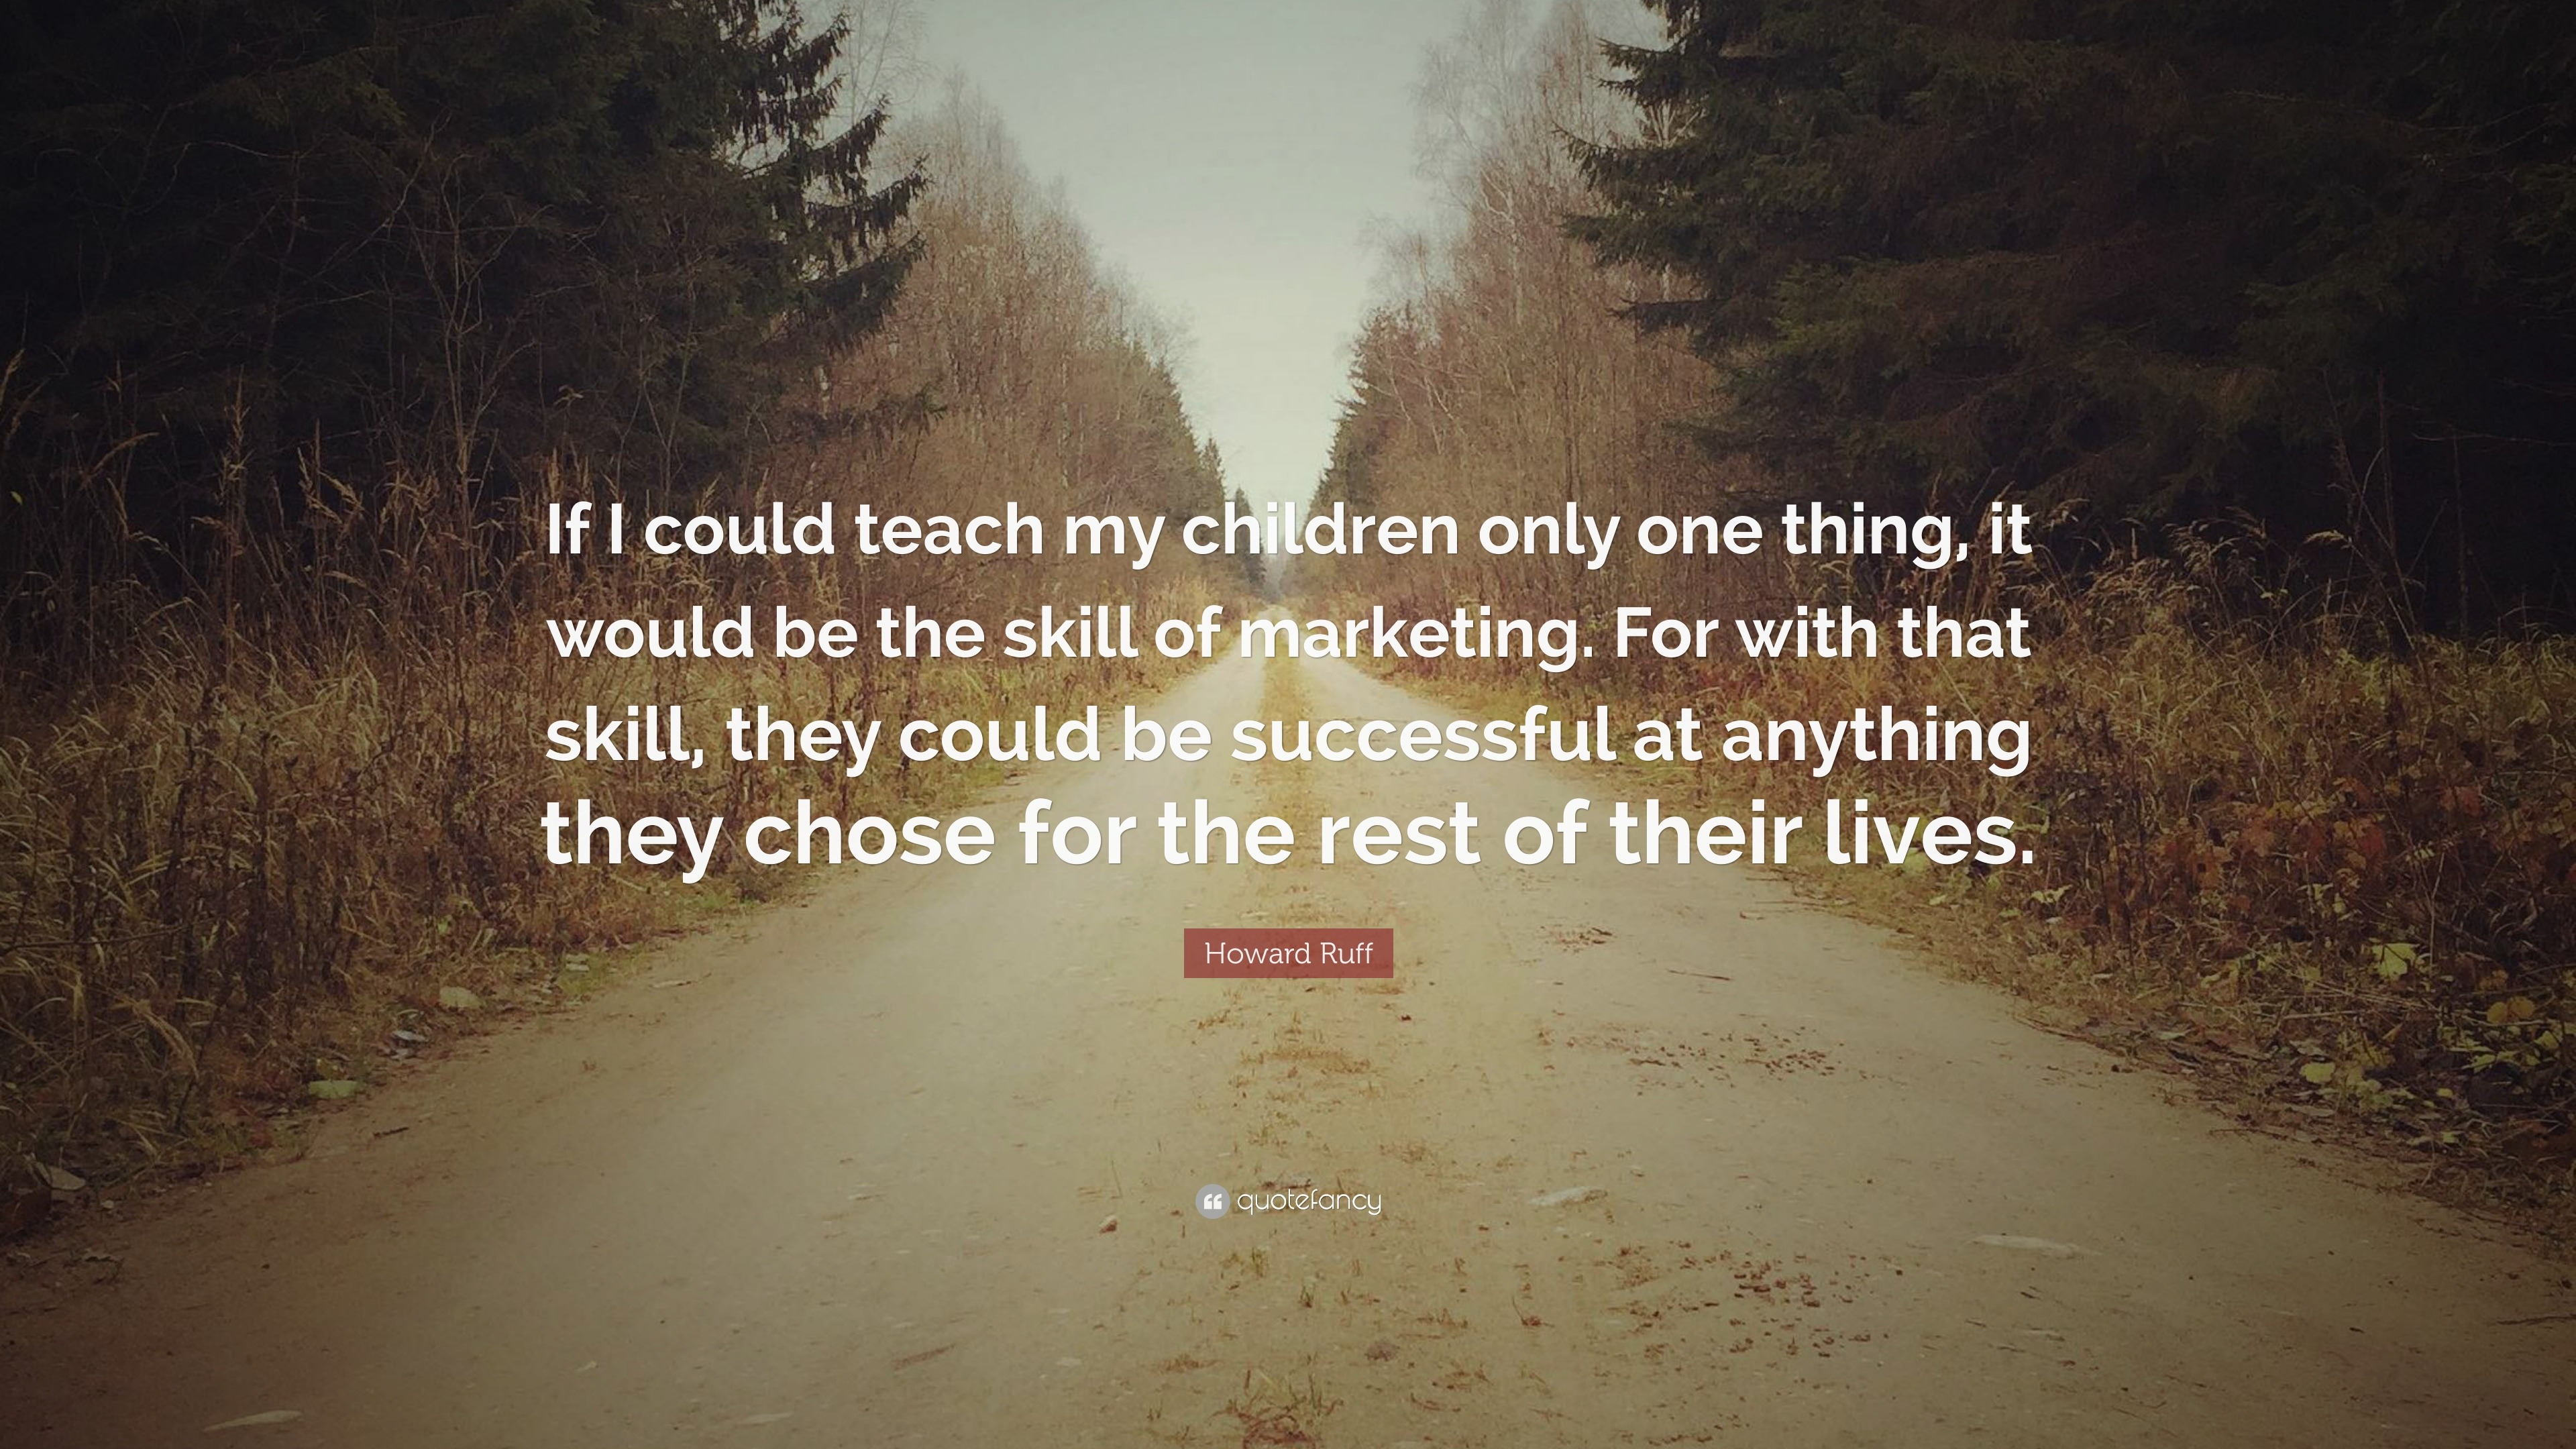 Howard Ruff Quote: “If I could teach my children only one thing, it ...